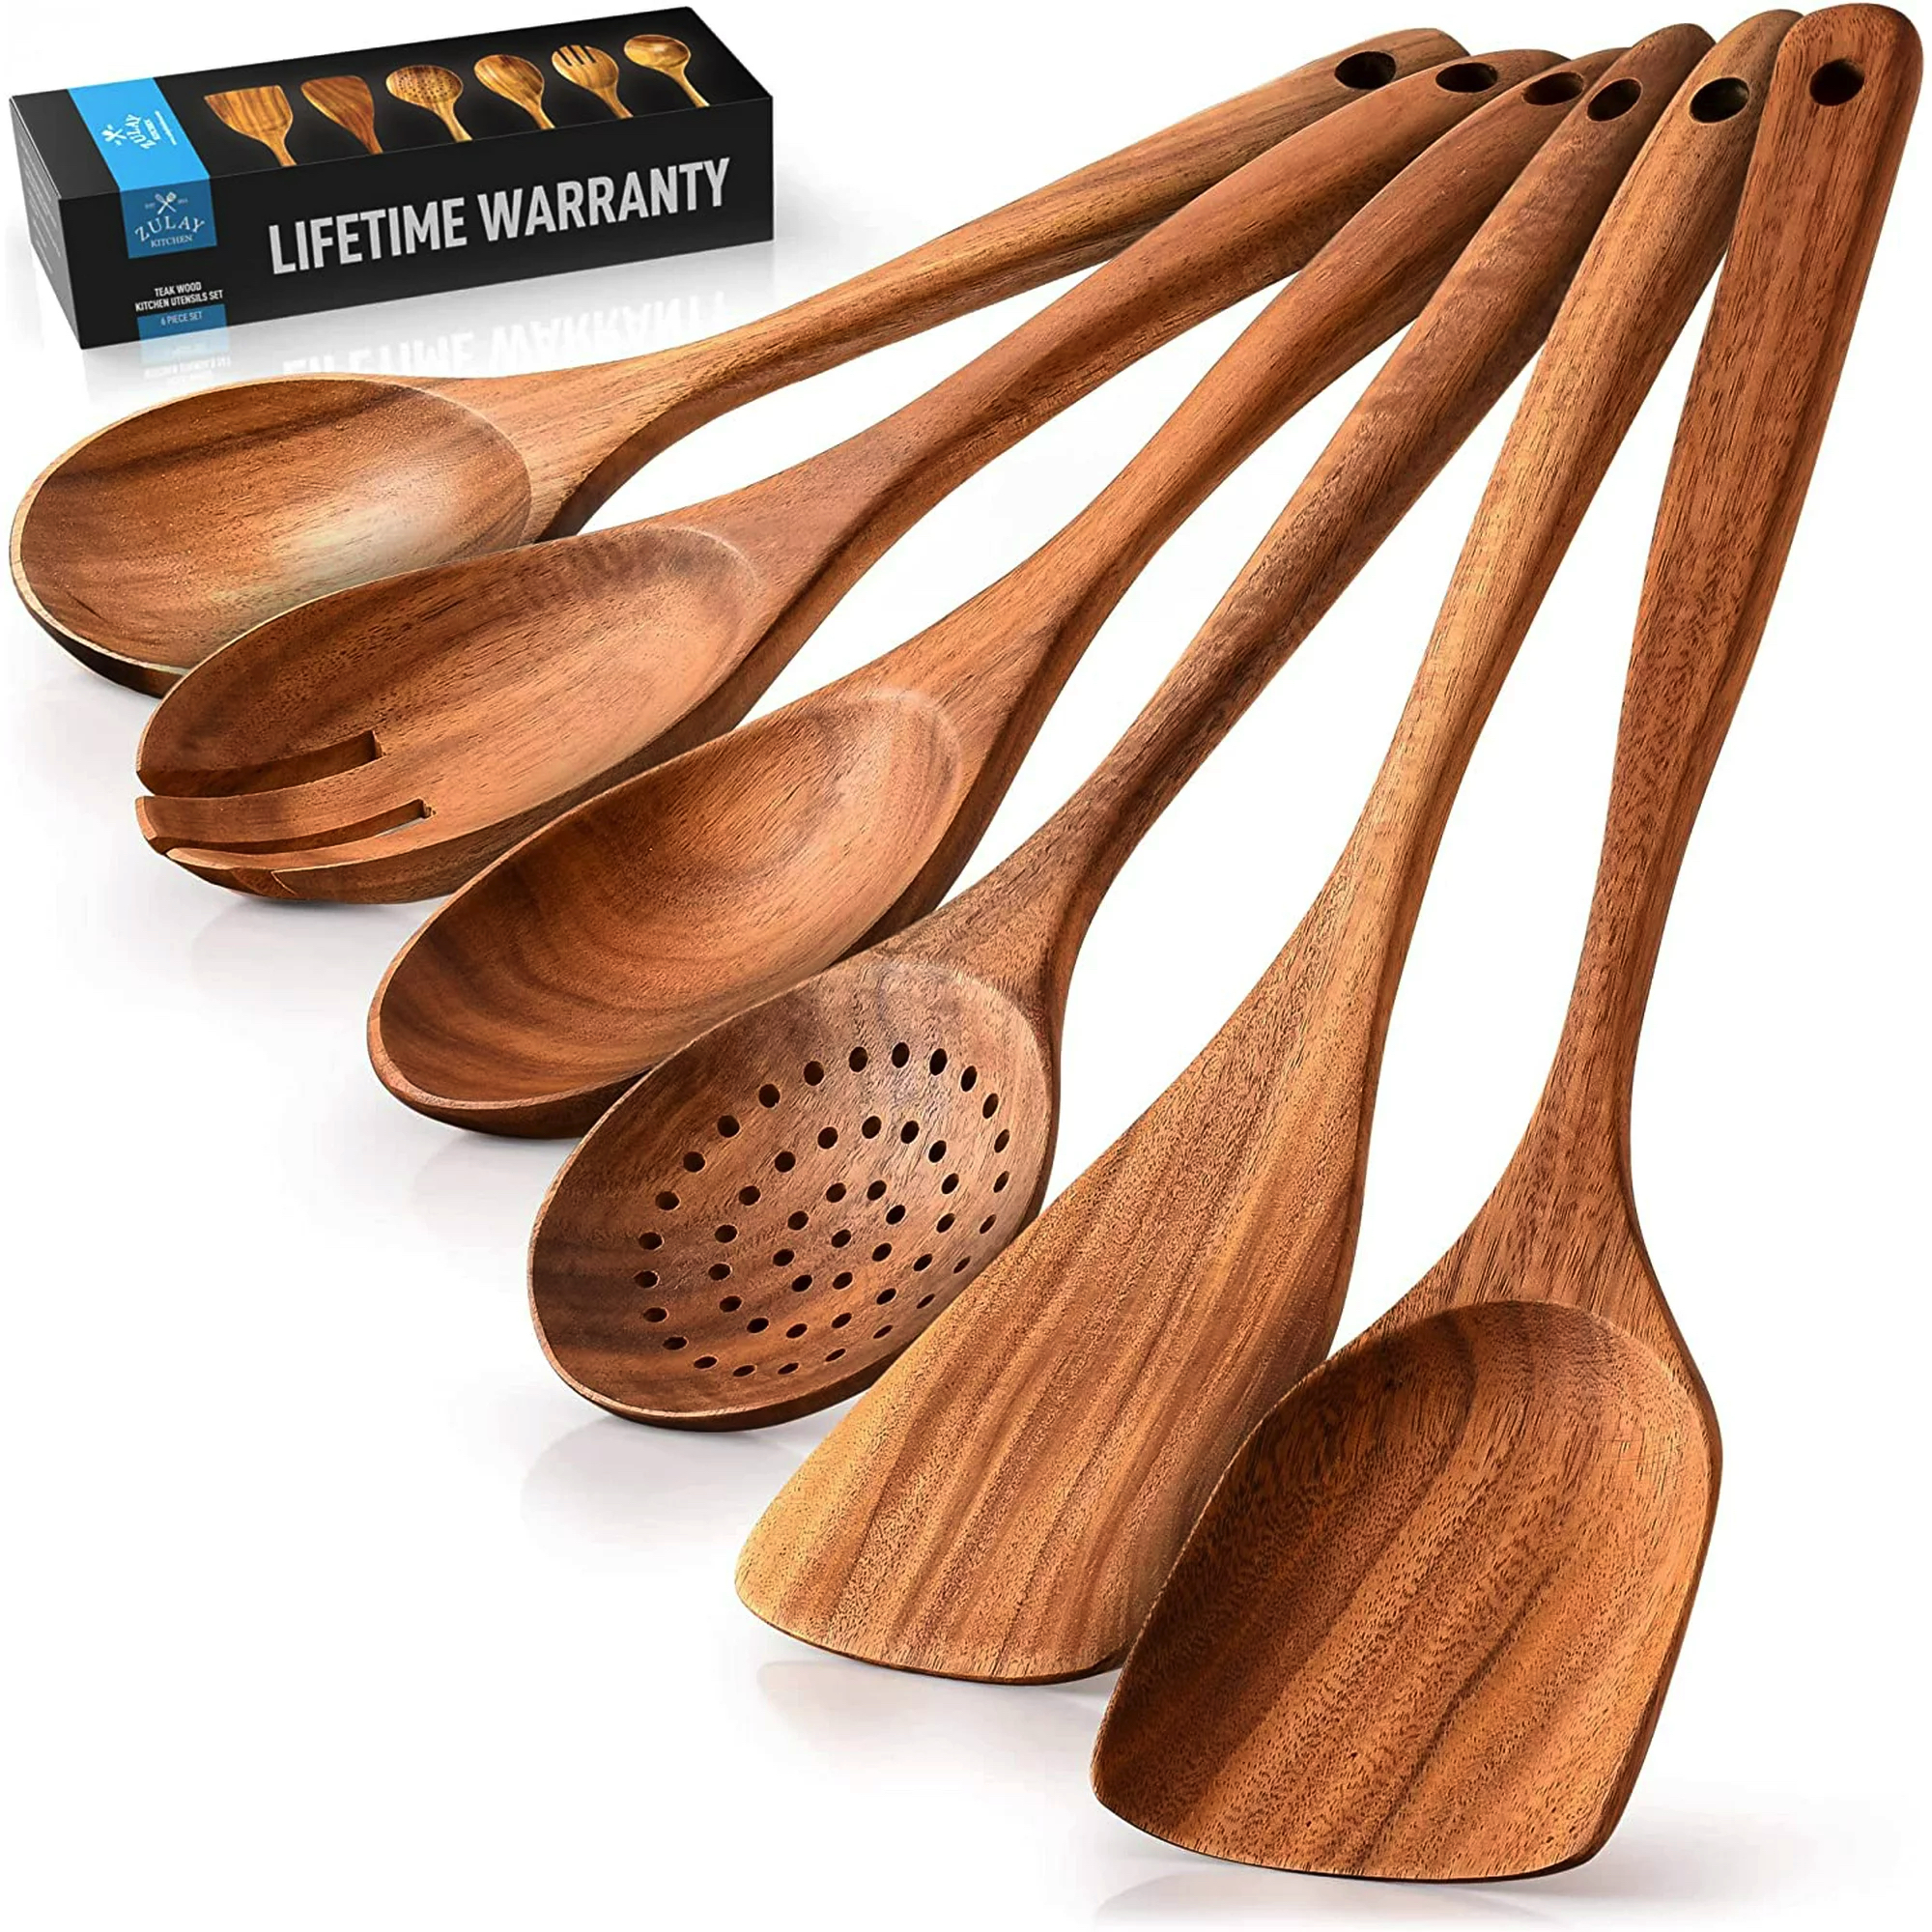 Zulay Kitchen Wooden Spoon for Cooking, Wooden Utensils for Cooking, Teak Wood Utensil Set Non Stick - 6 Piece Set - image 1 of 8